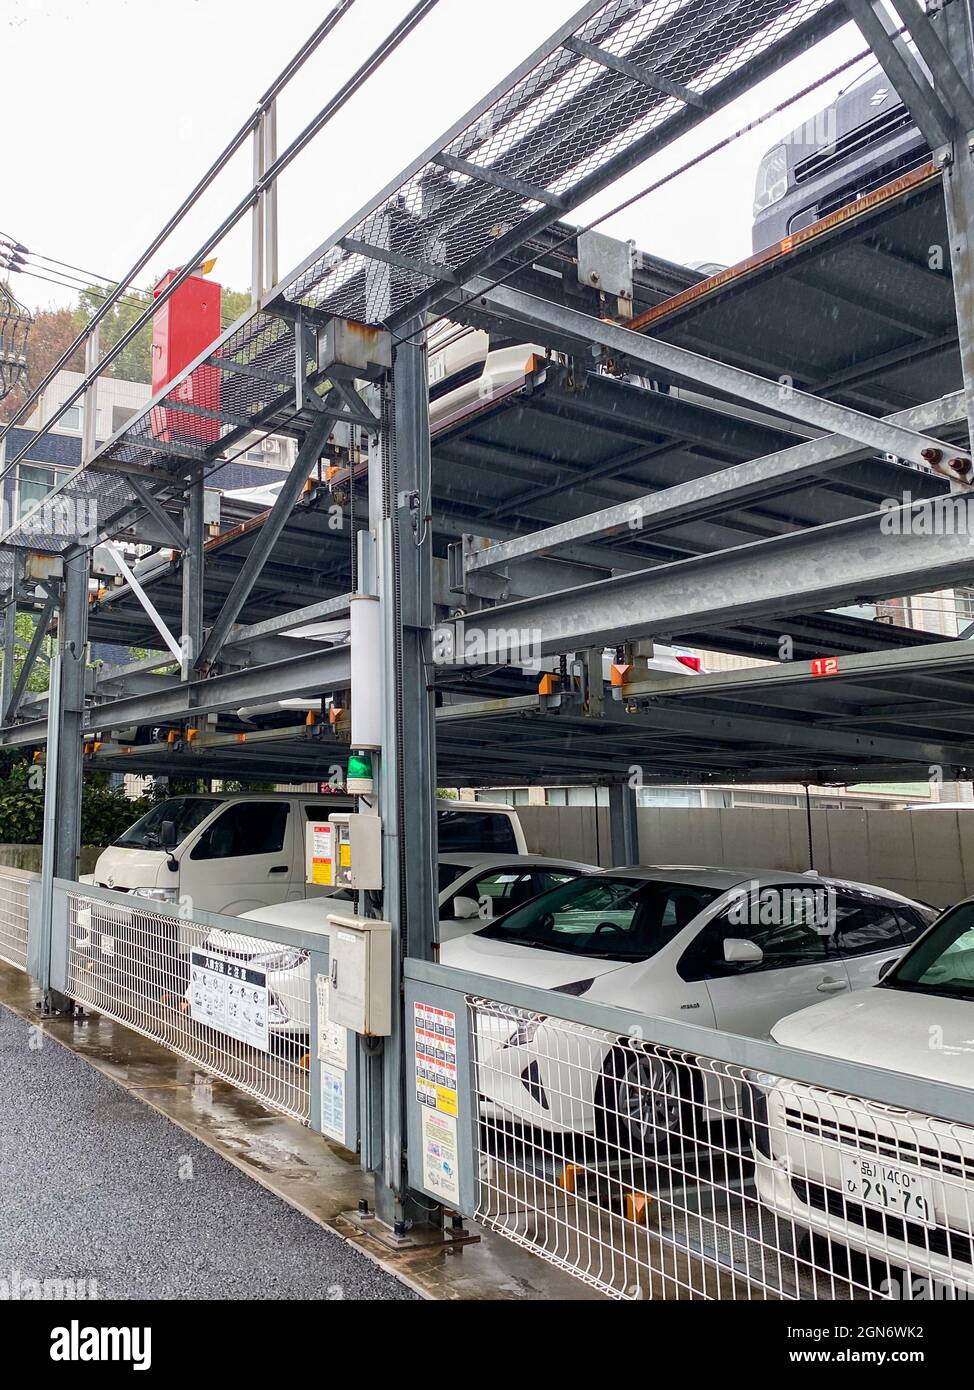 Tokyo, Japan - 23 November 2019: Two Storey Street Parking for Cars in Tokyo Stock Photo